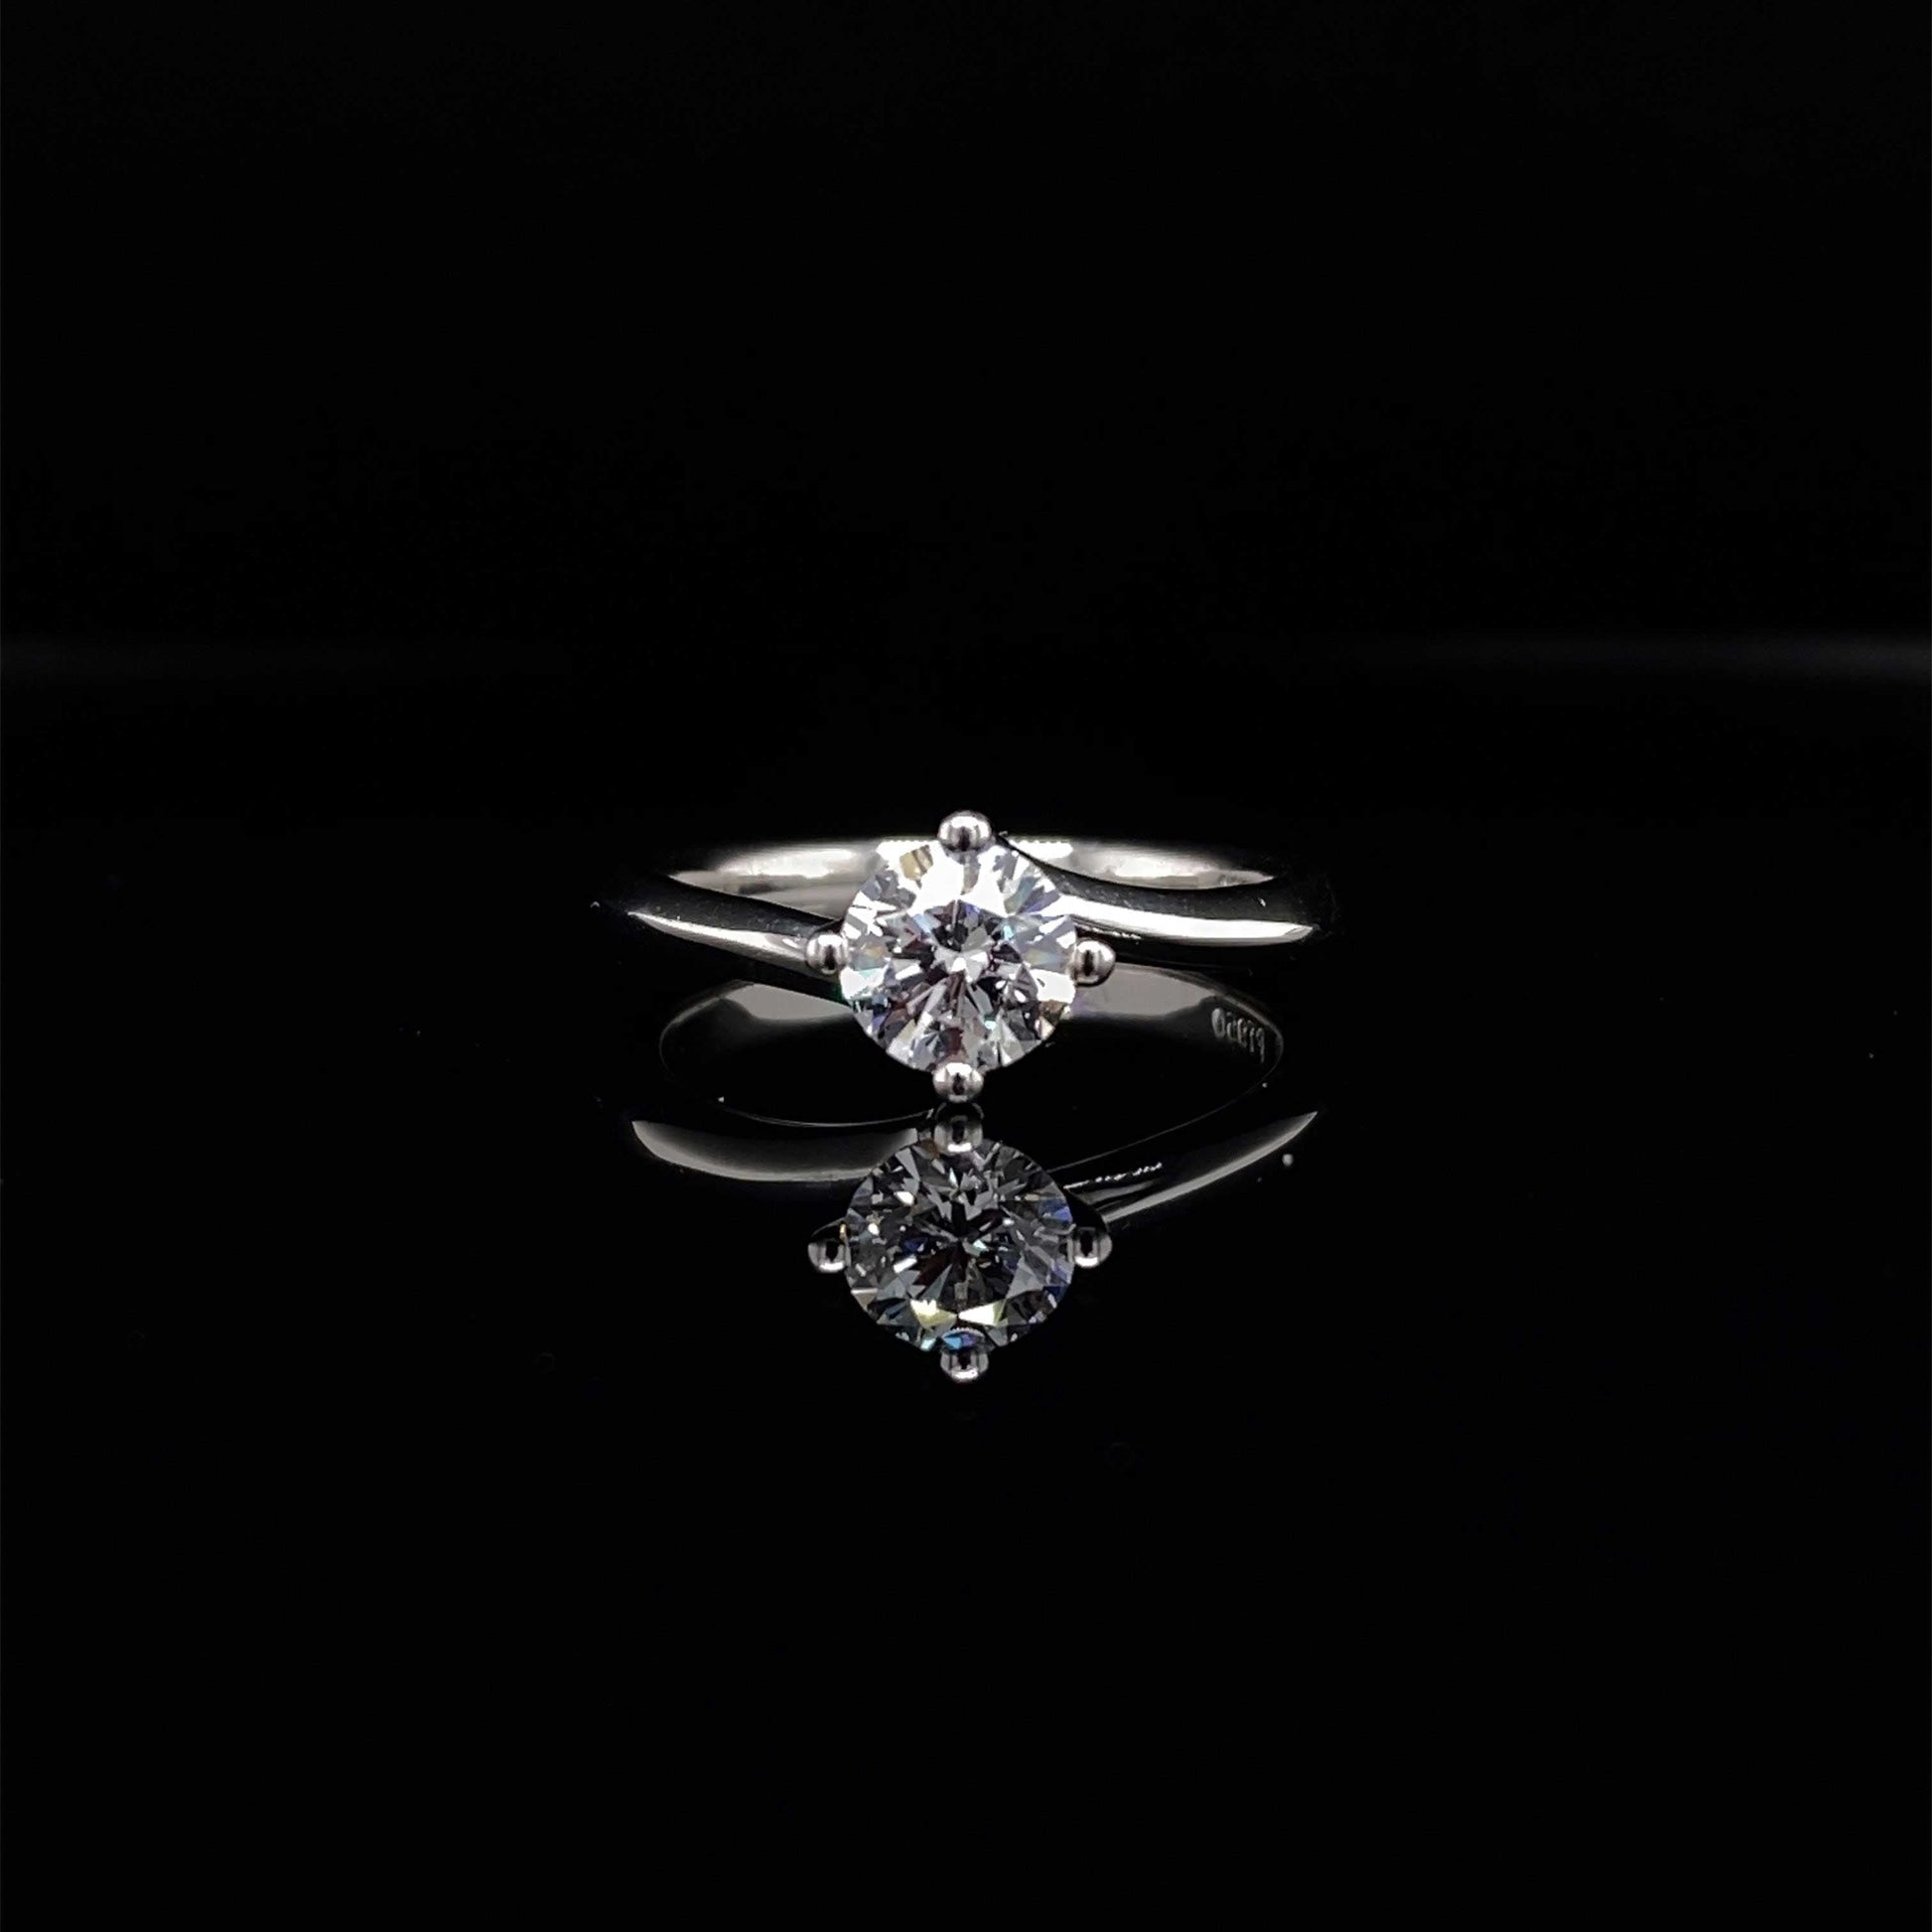 0.70ct GIA Certified Round Brilliant Diamond Solitaire Ring